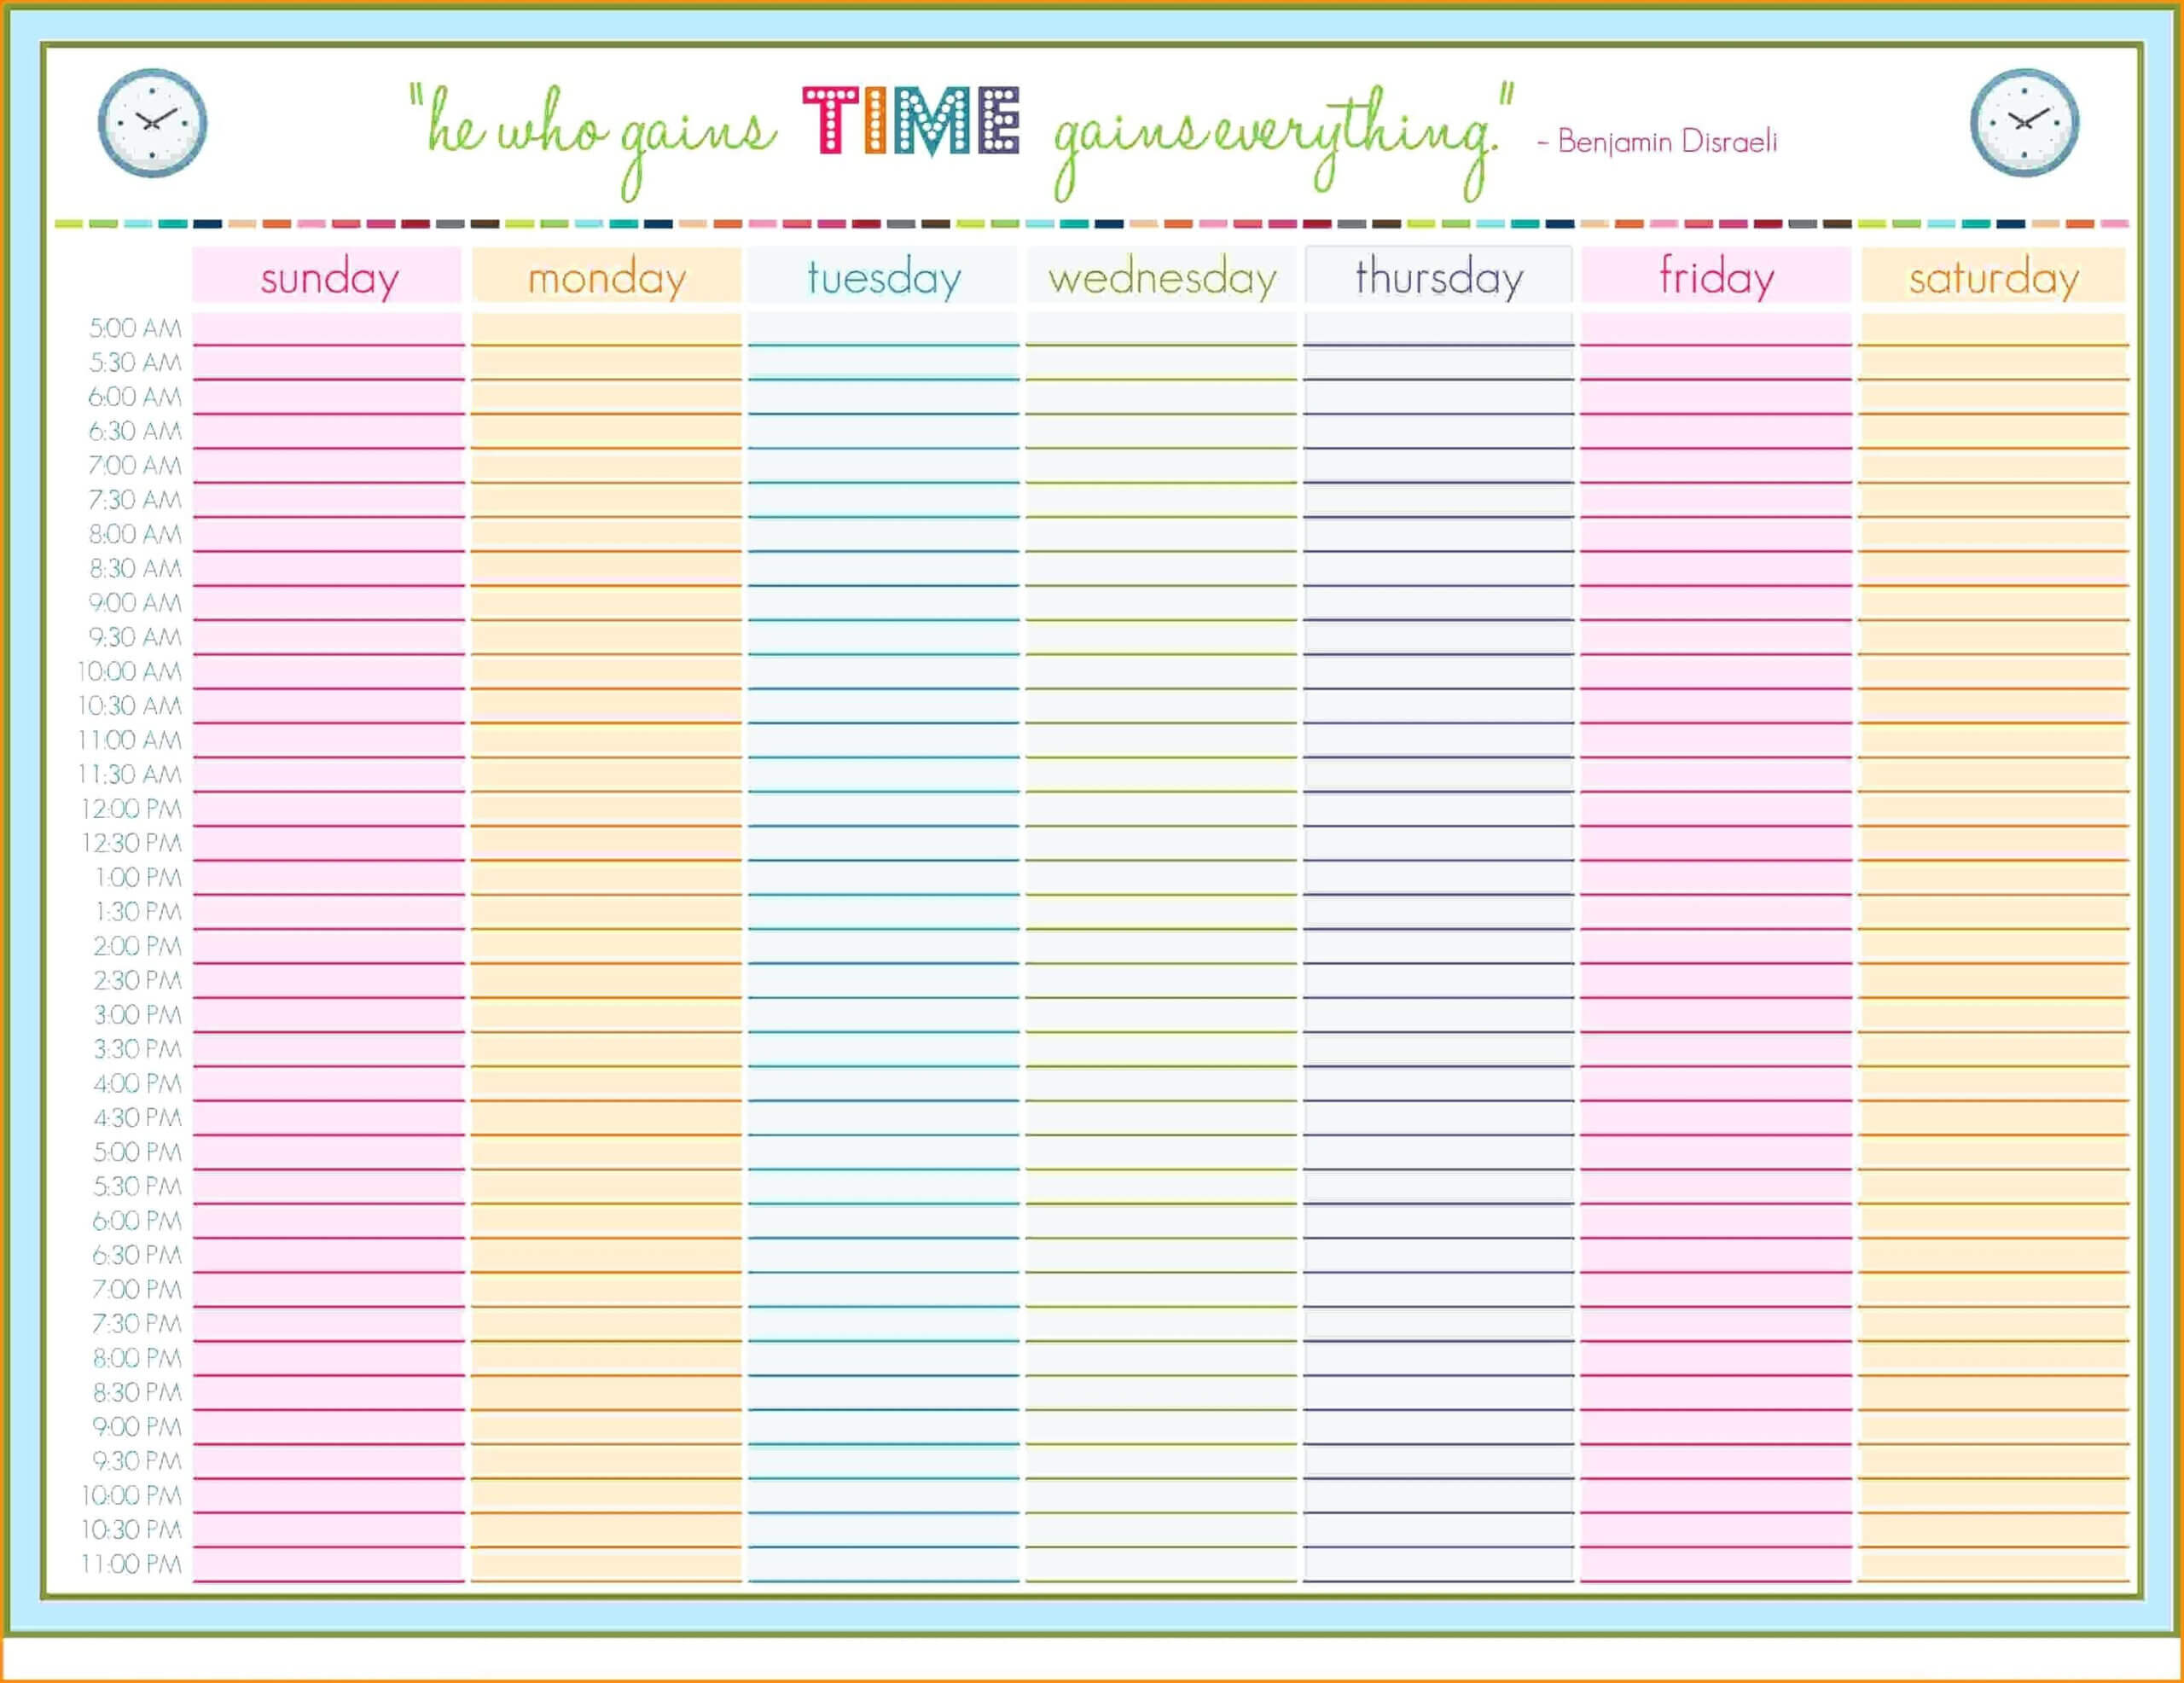 Timetable Template Free #timetabletemplateword | Timetable Throughout Blank Revision Timetable Template